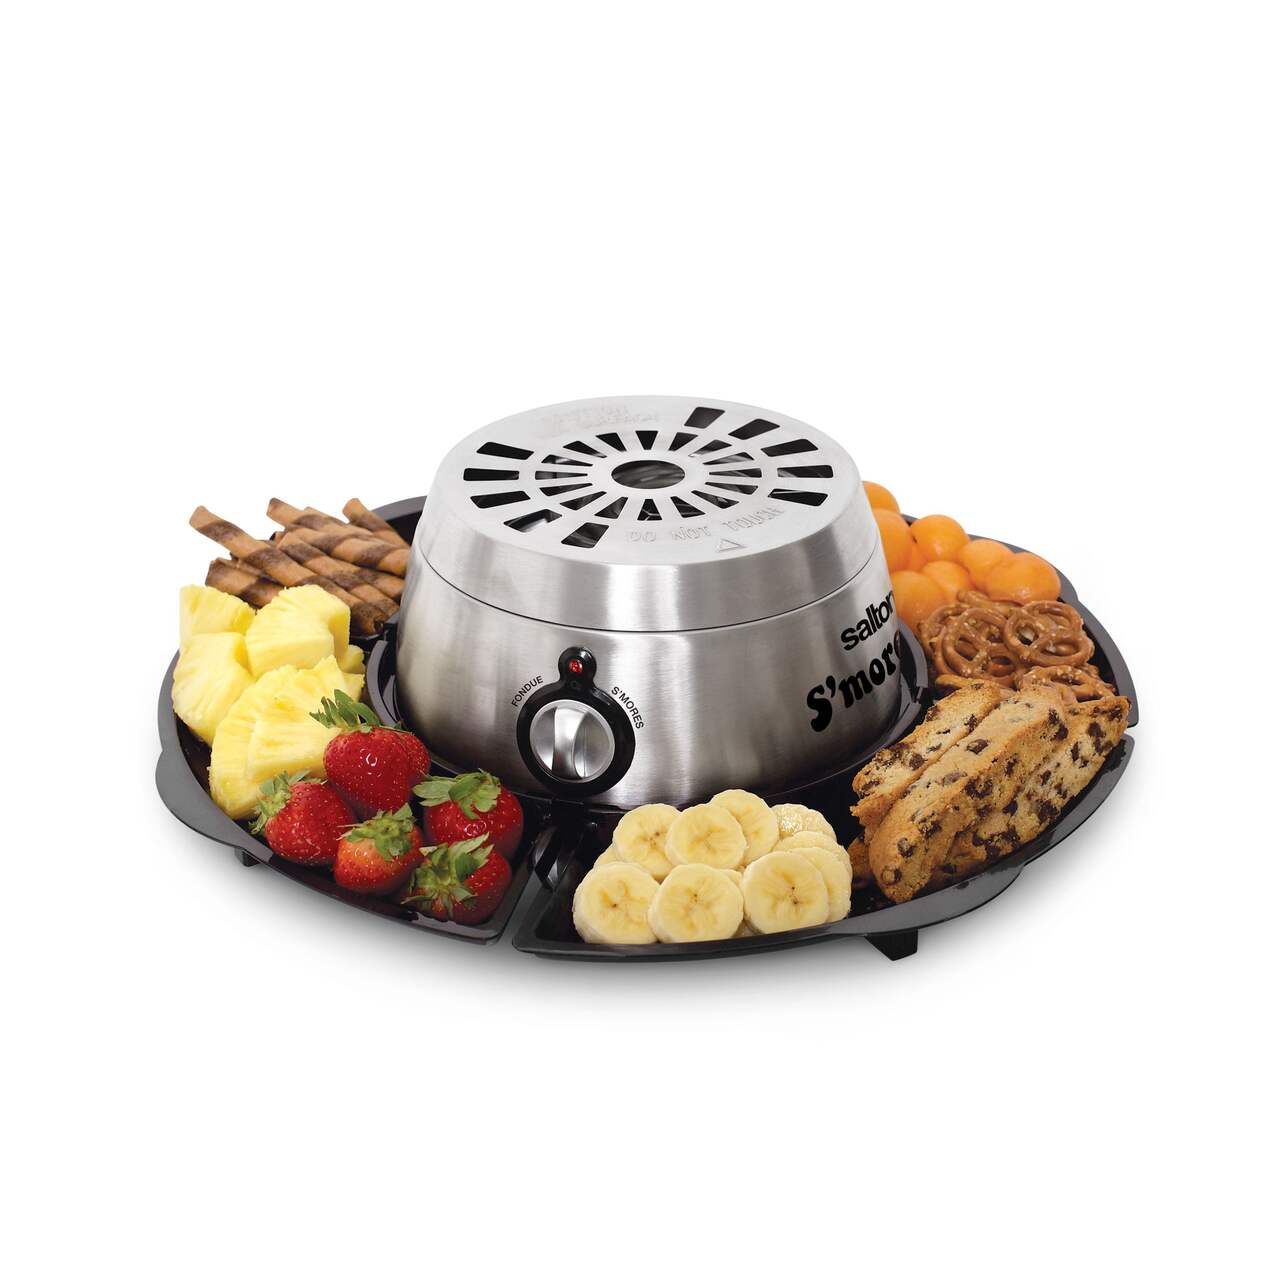 https://media-www.canadiantire.ca/product/living/kitchen/kitchen-appliances/4991125/s-mores-and-fondue-maker-b6969afa-3e99-4bd4-9263-1bc5464fb744-jpgrendition.jpg?imdensity=1&imwidth=640&impolicy=mZoom